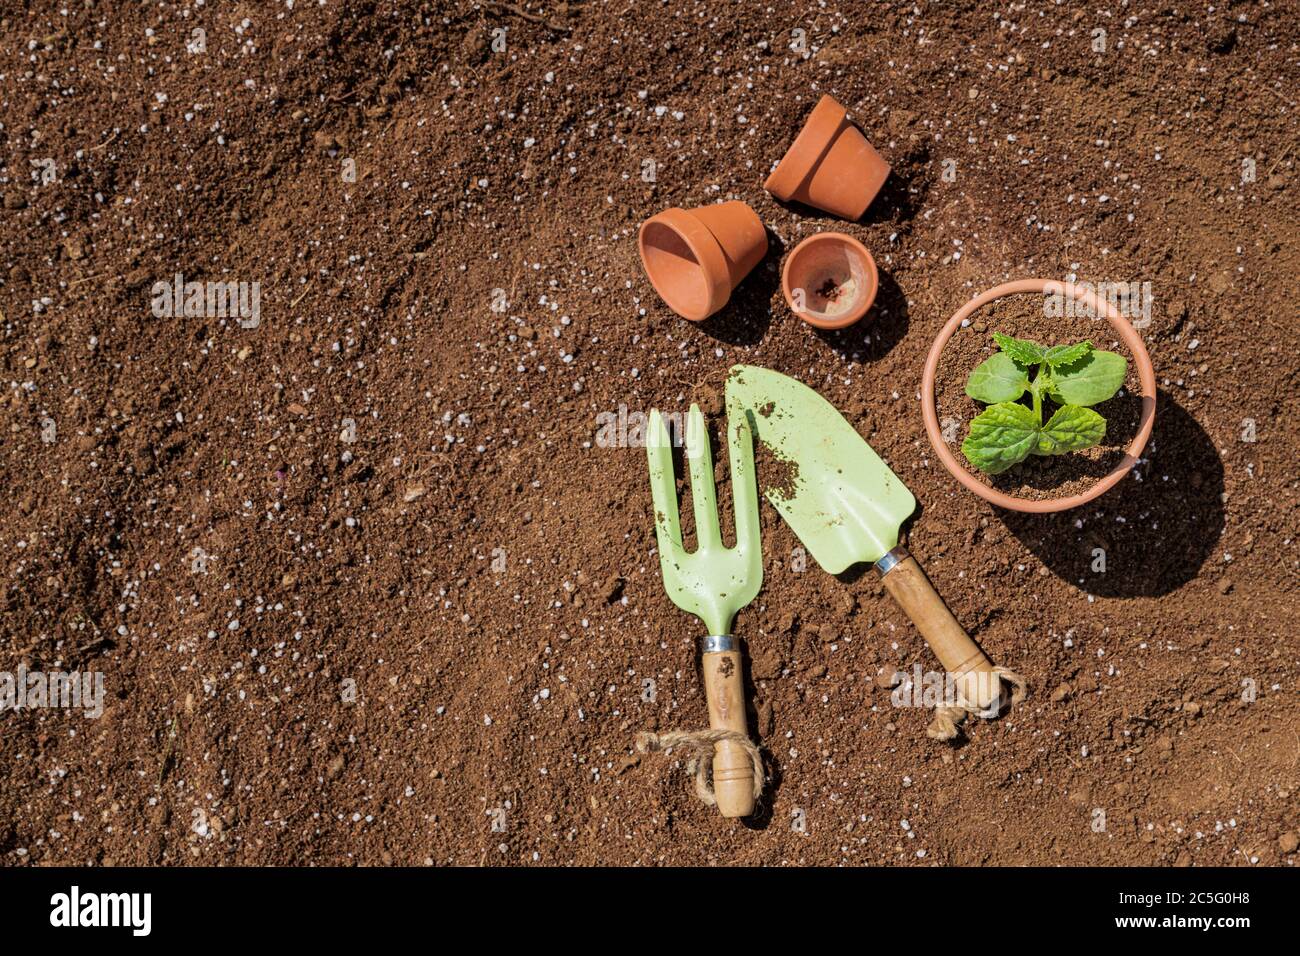 Gardening concept- gardening tools and flowers in the garden 004 Stock Photo